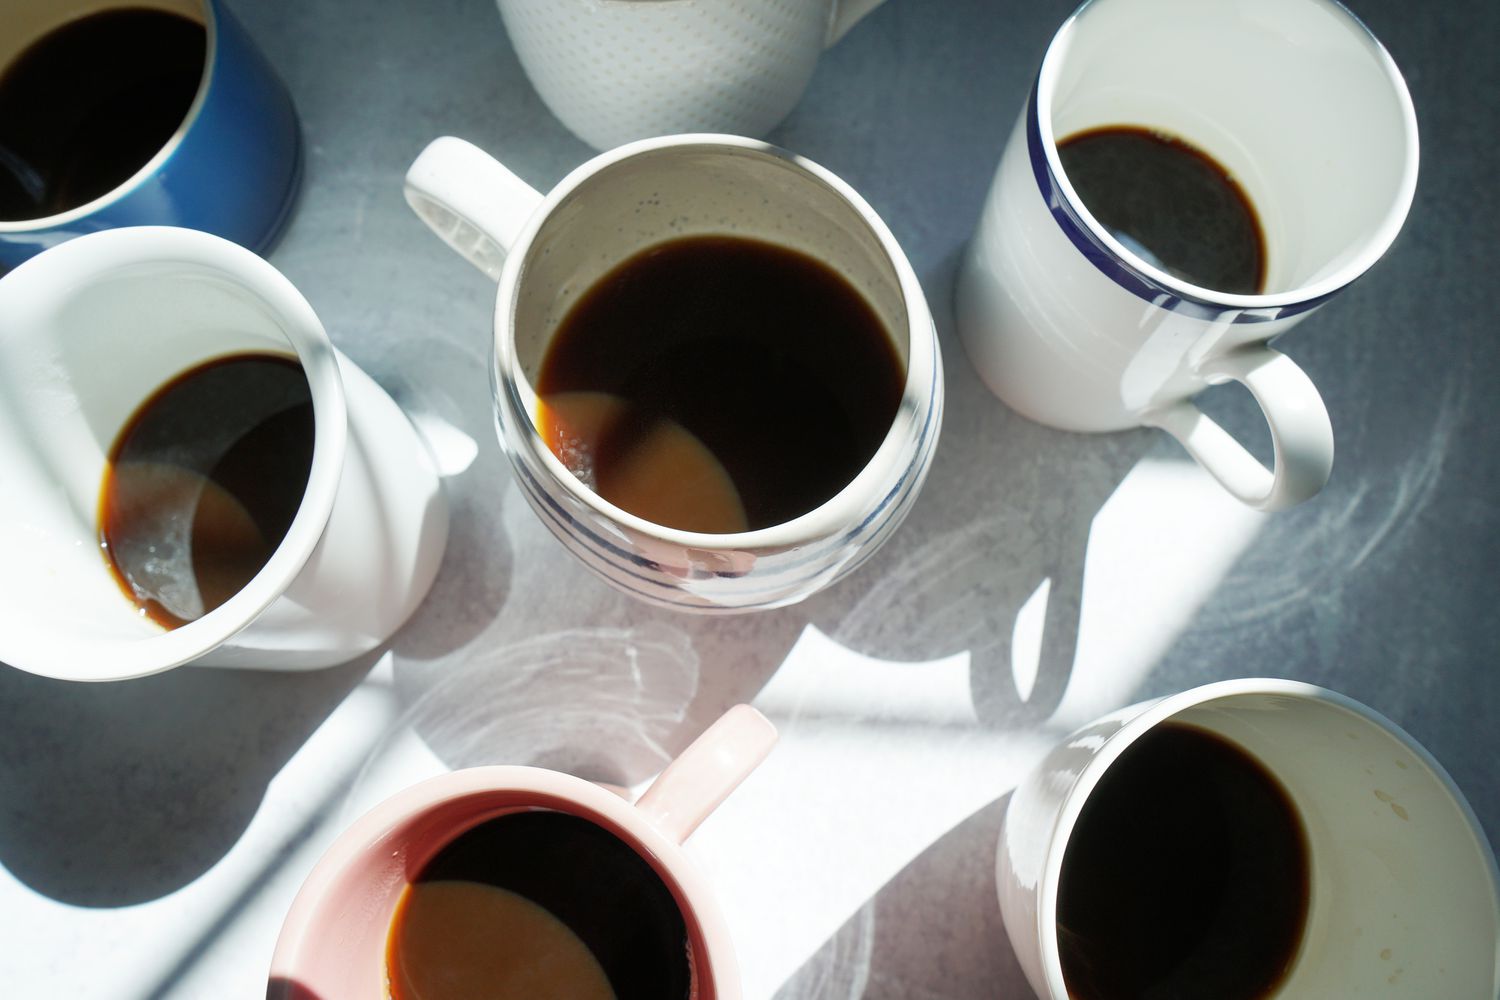 several mugs half full of coffee on a light grey surface